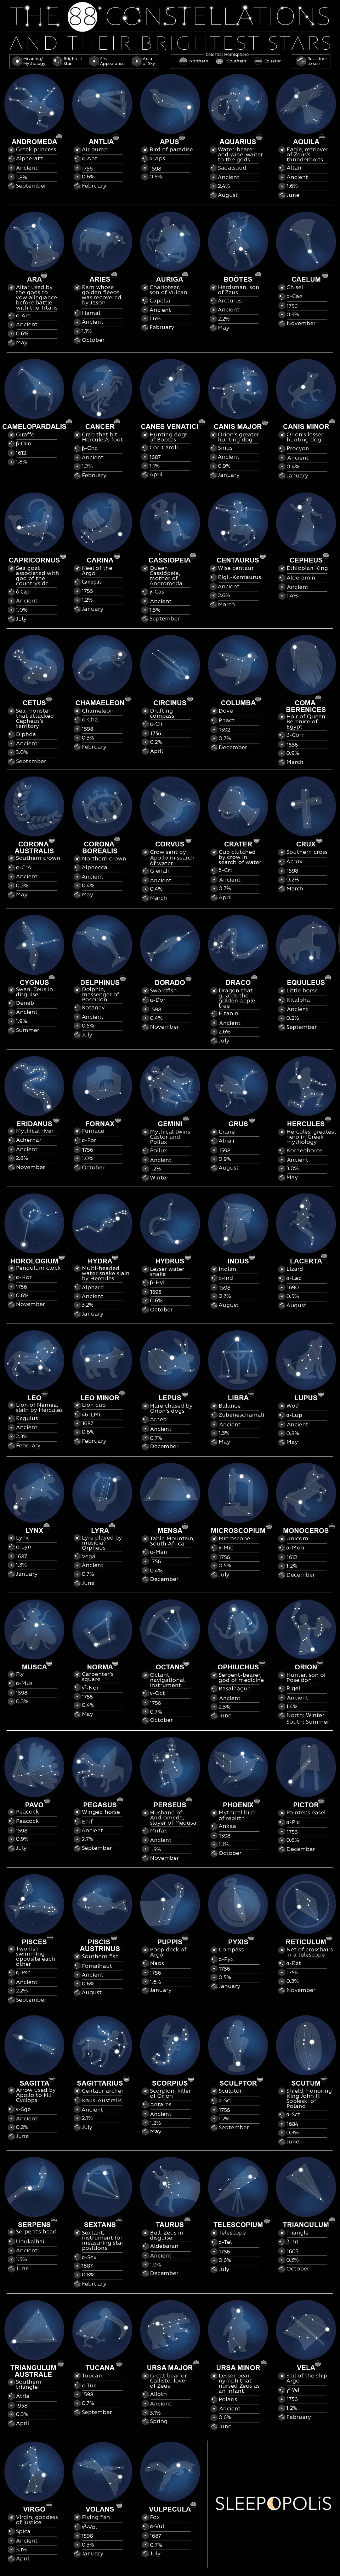 The 88 Constellations and Their Brightest Stars